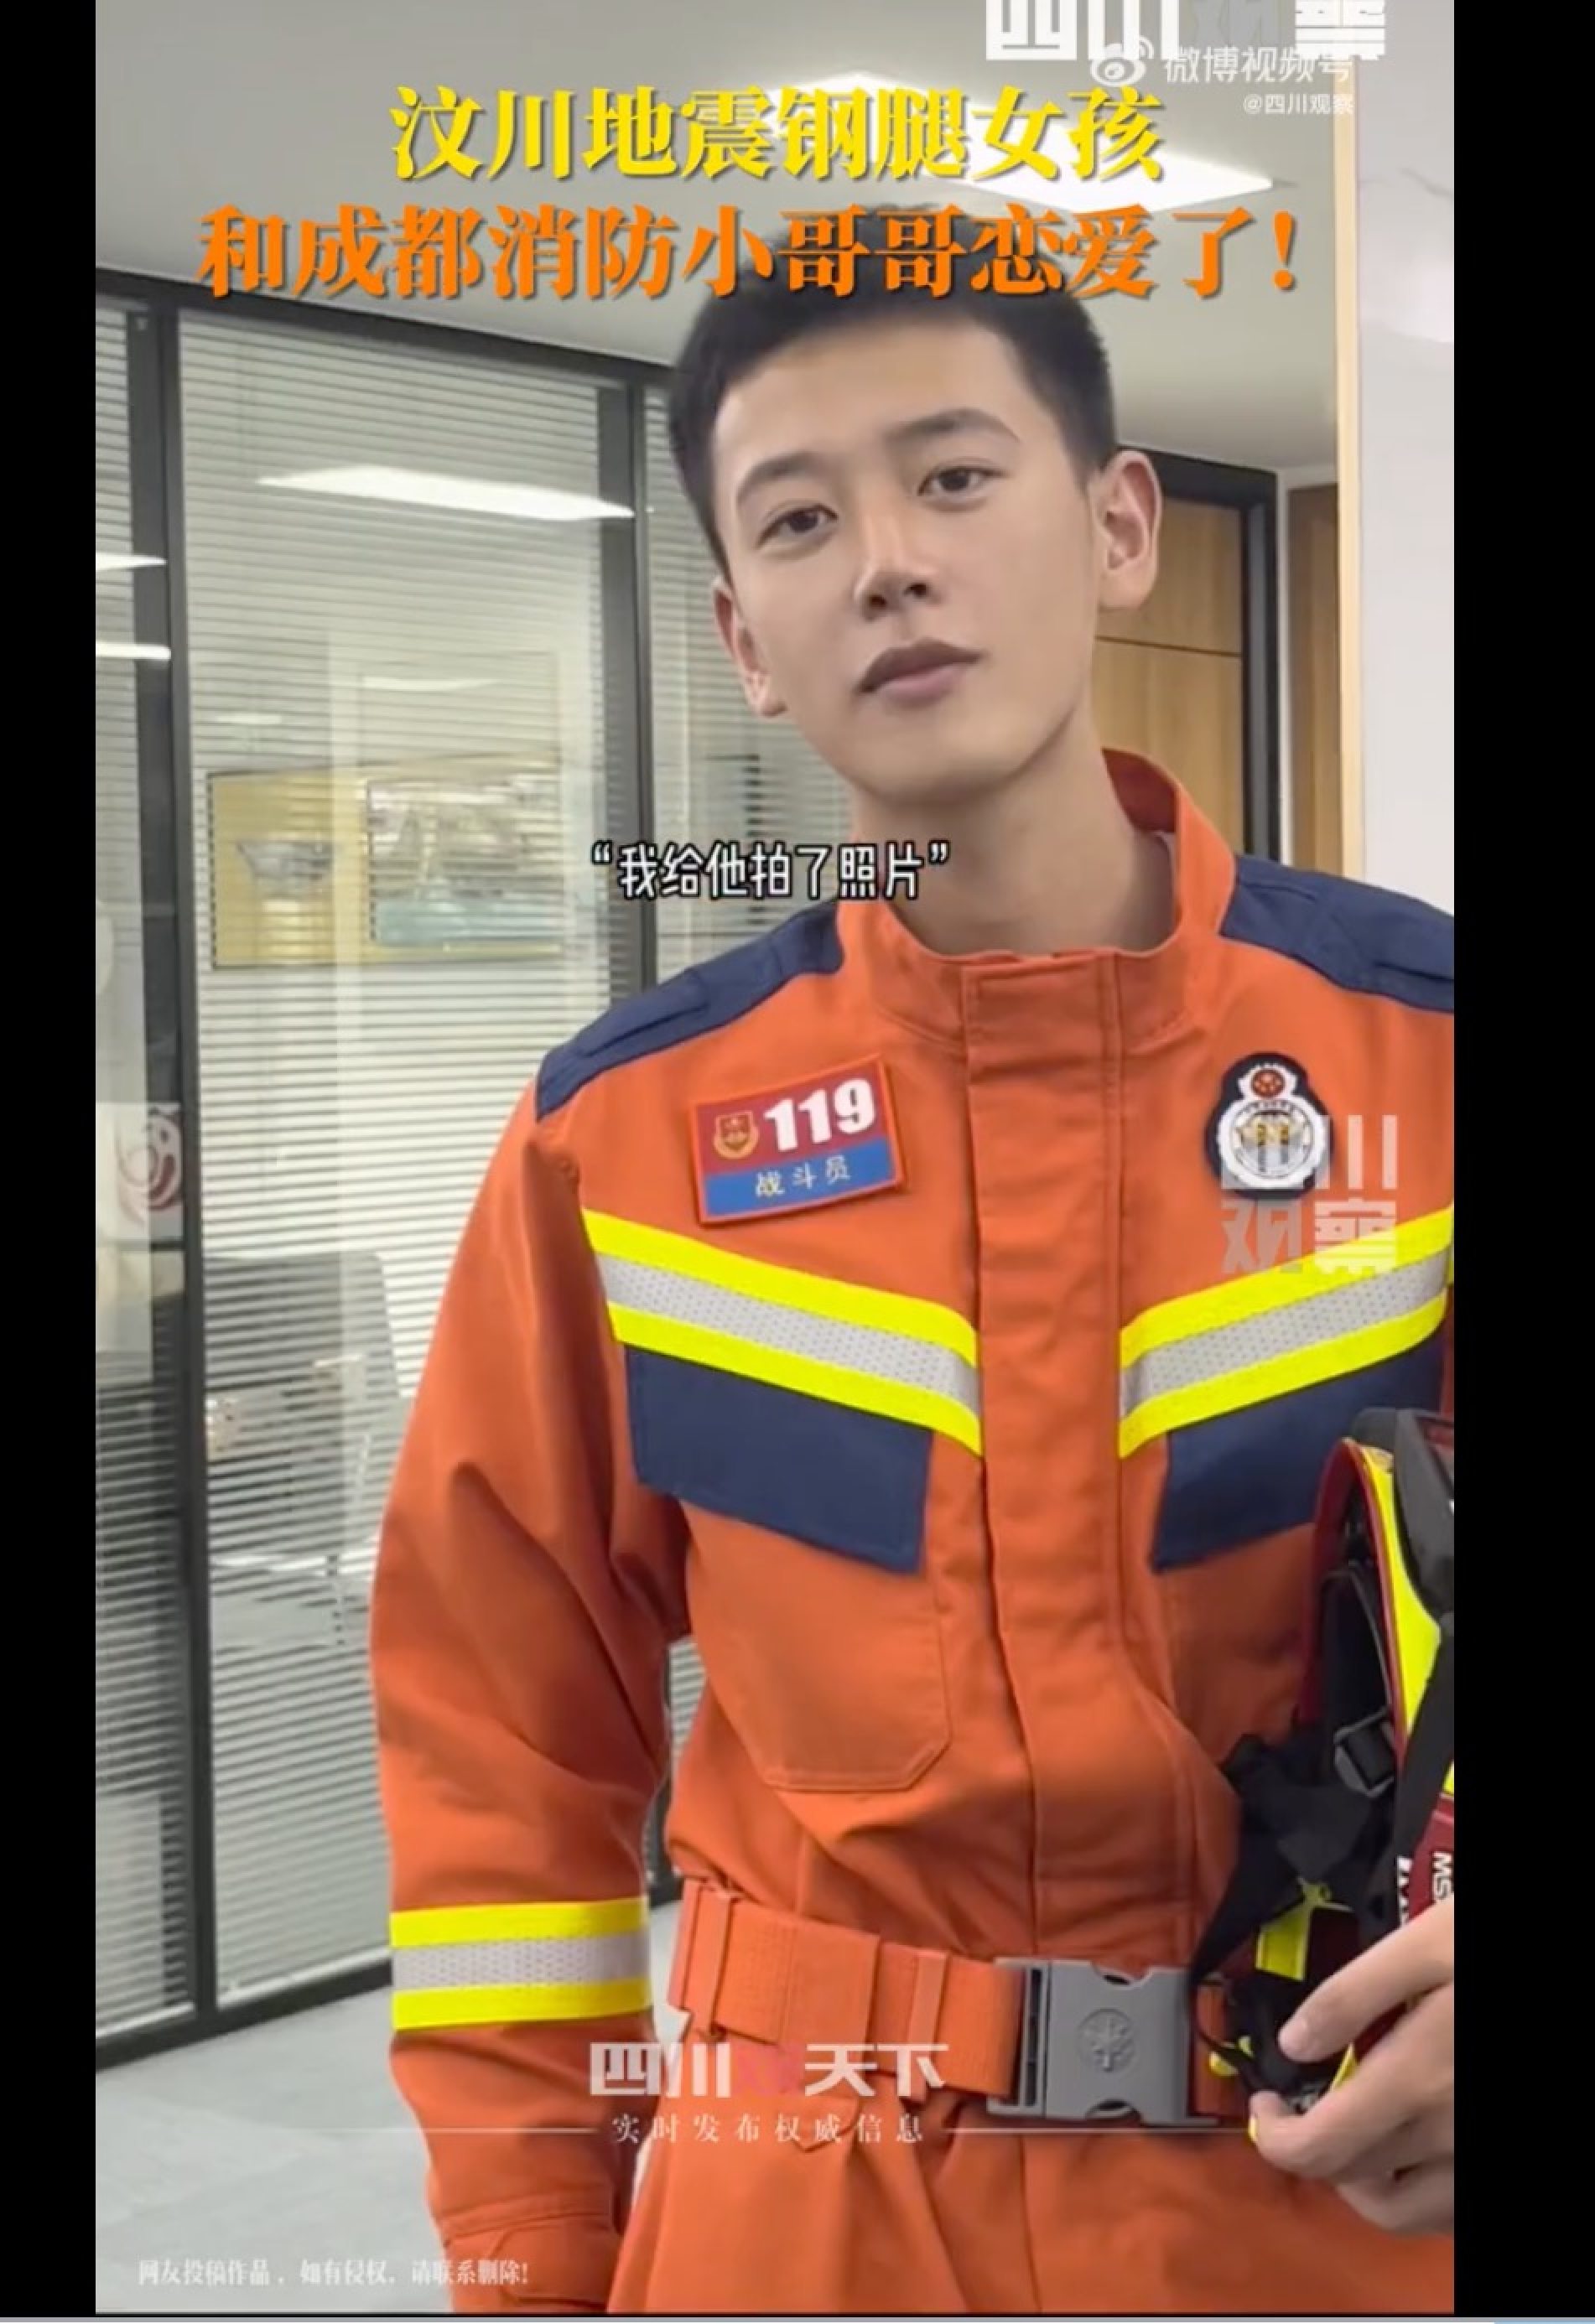 Firefighter Li was shy at first but was won over to love by Niu’s courage. Photo: Weibo